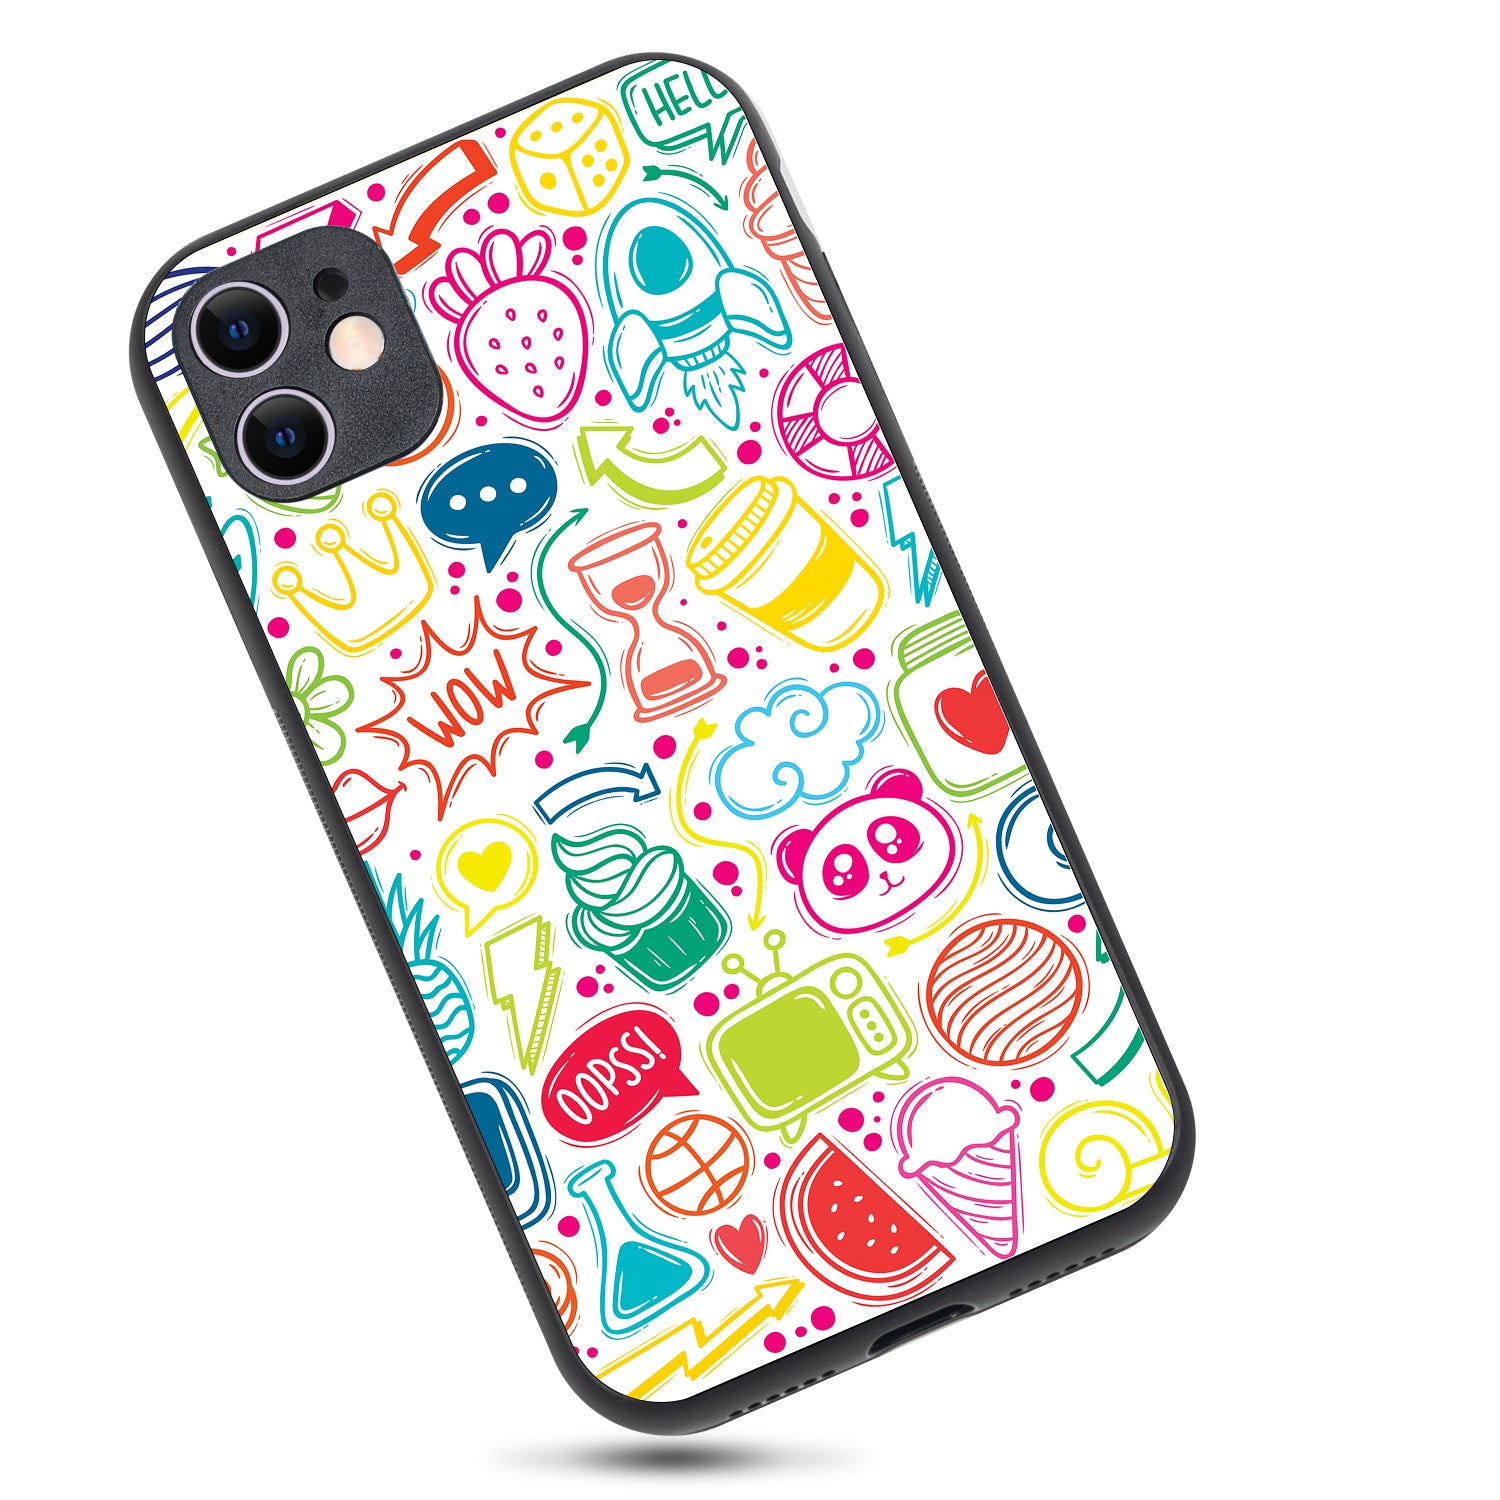 Wow Doodle iPhone 11 Case